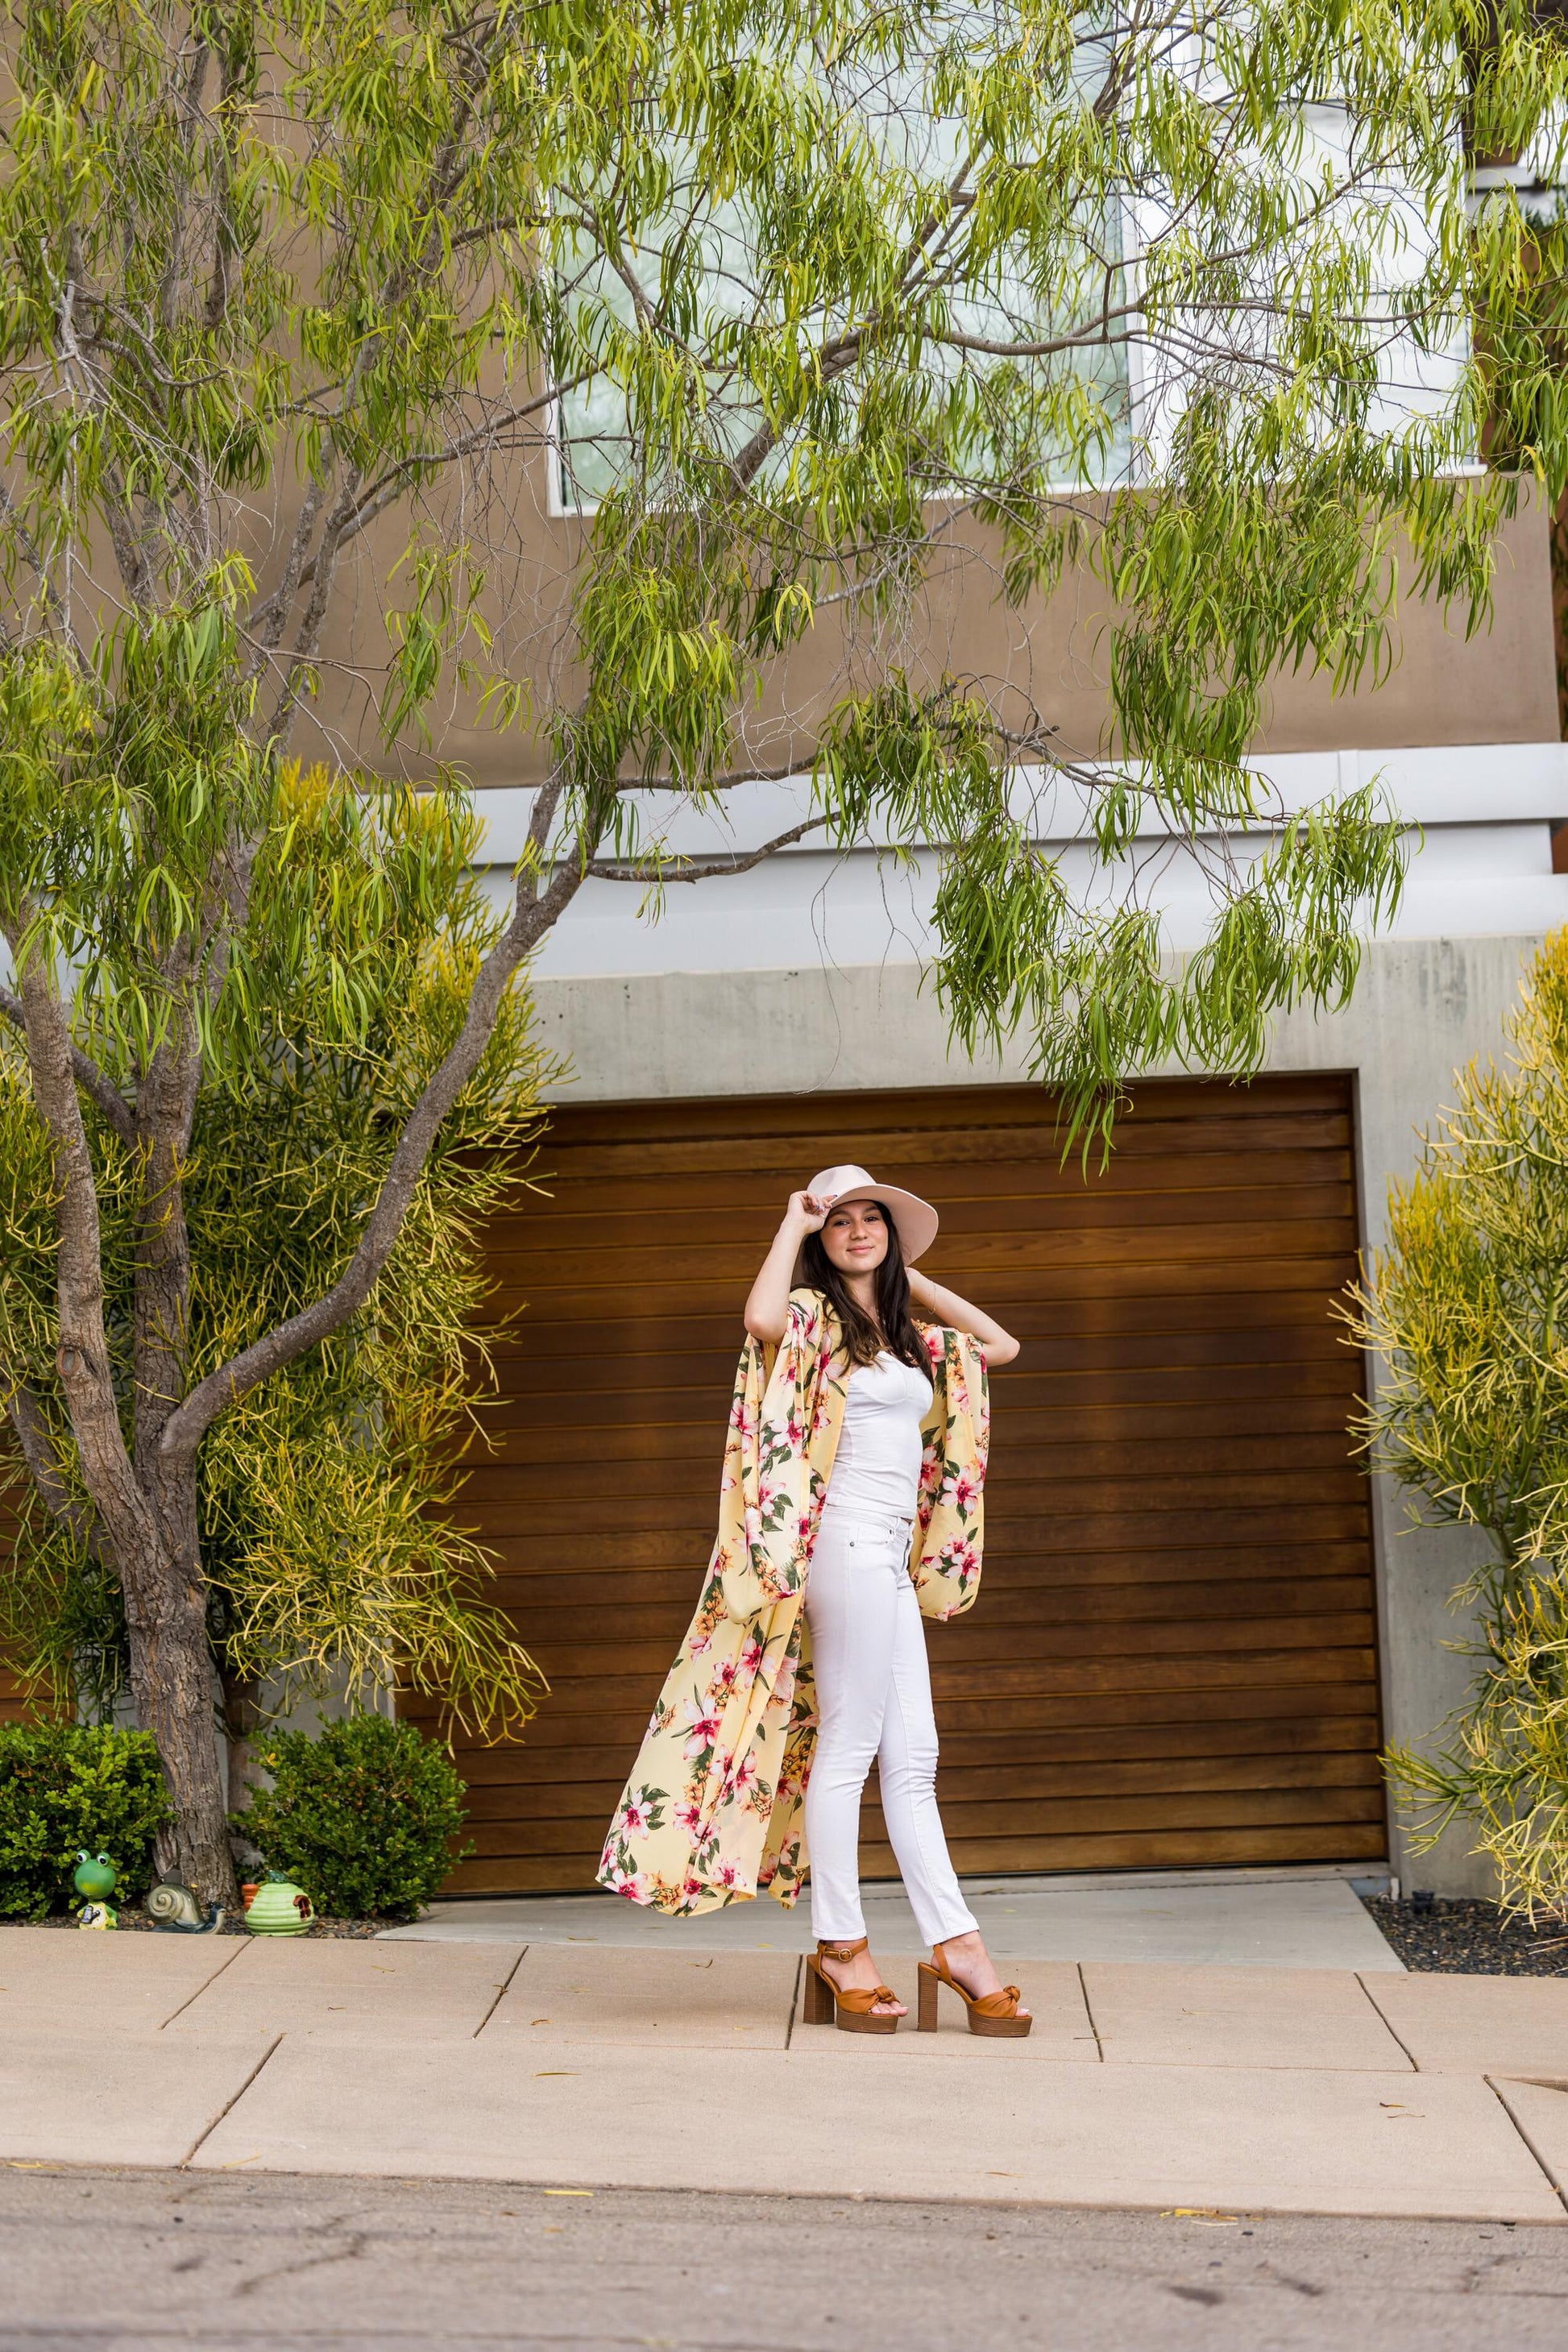 michael's orchids yellow floral orchid kimono pastel romantic wrap dress shawl coverup cardigan layering duster robe jennafergrace luxe